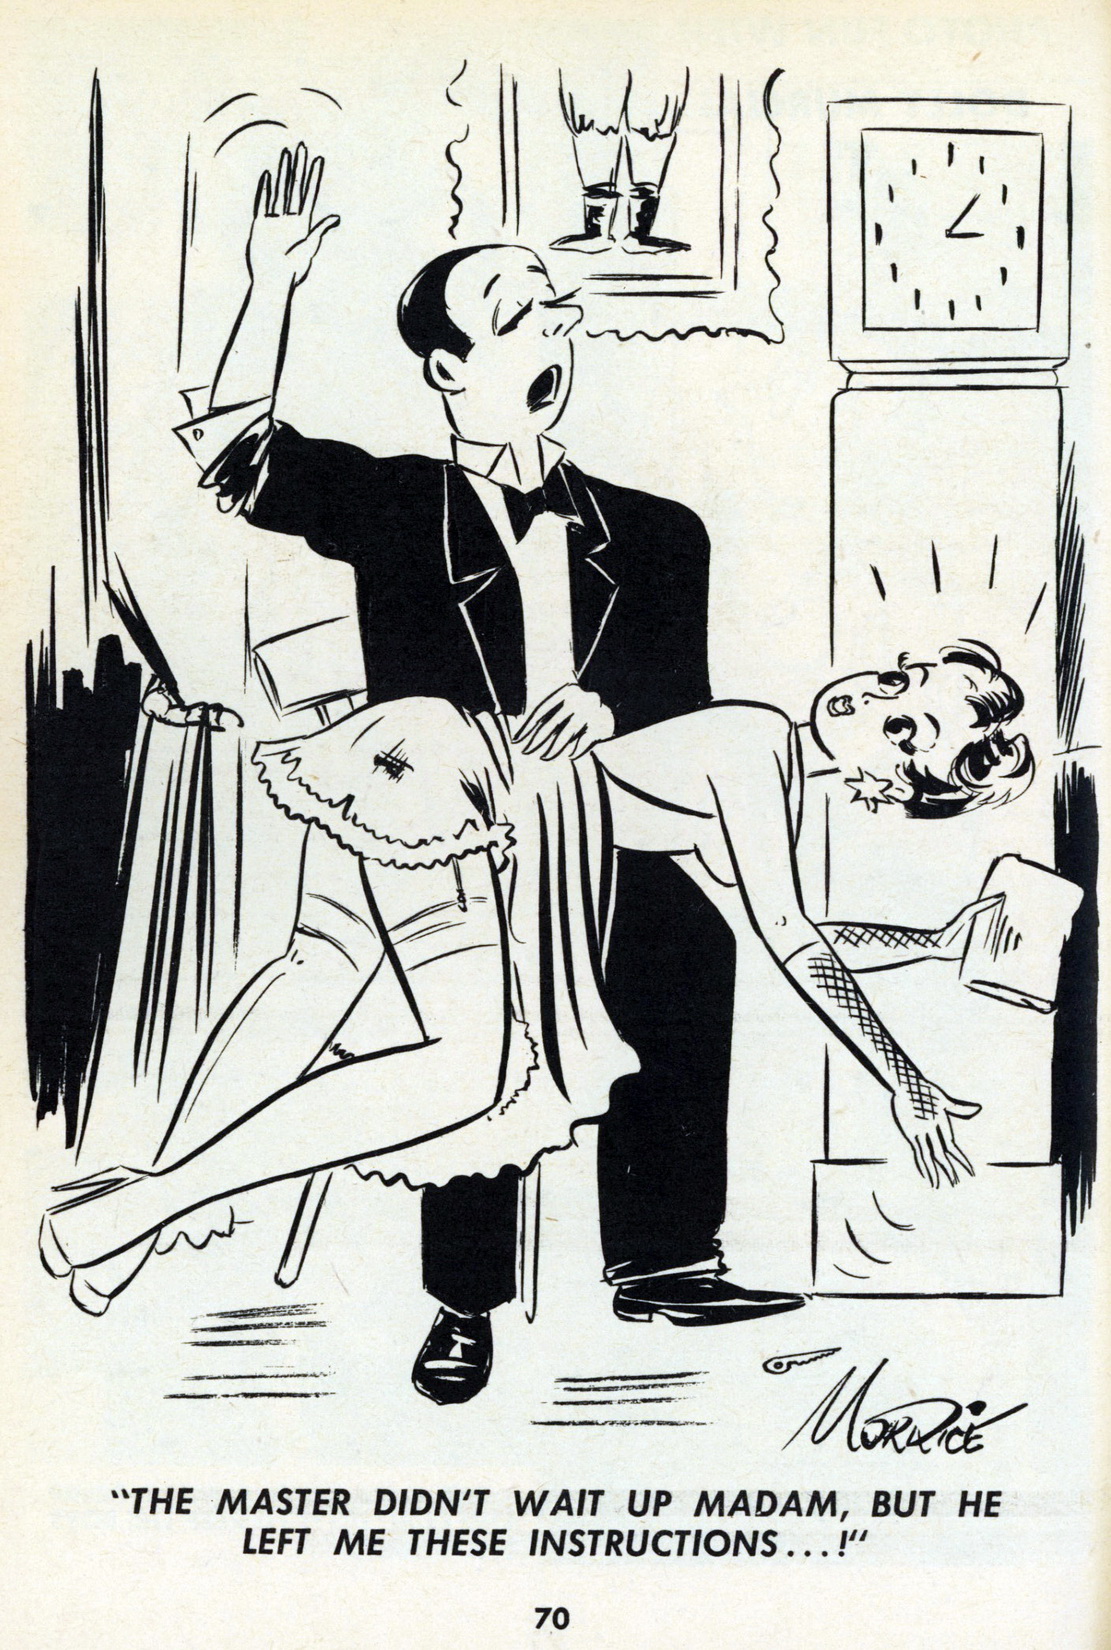 george morrice butler spanks mistress of the house for coming home late.